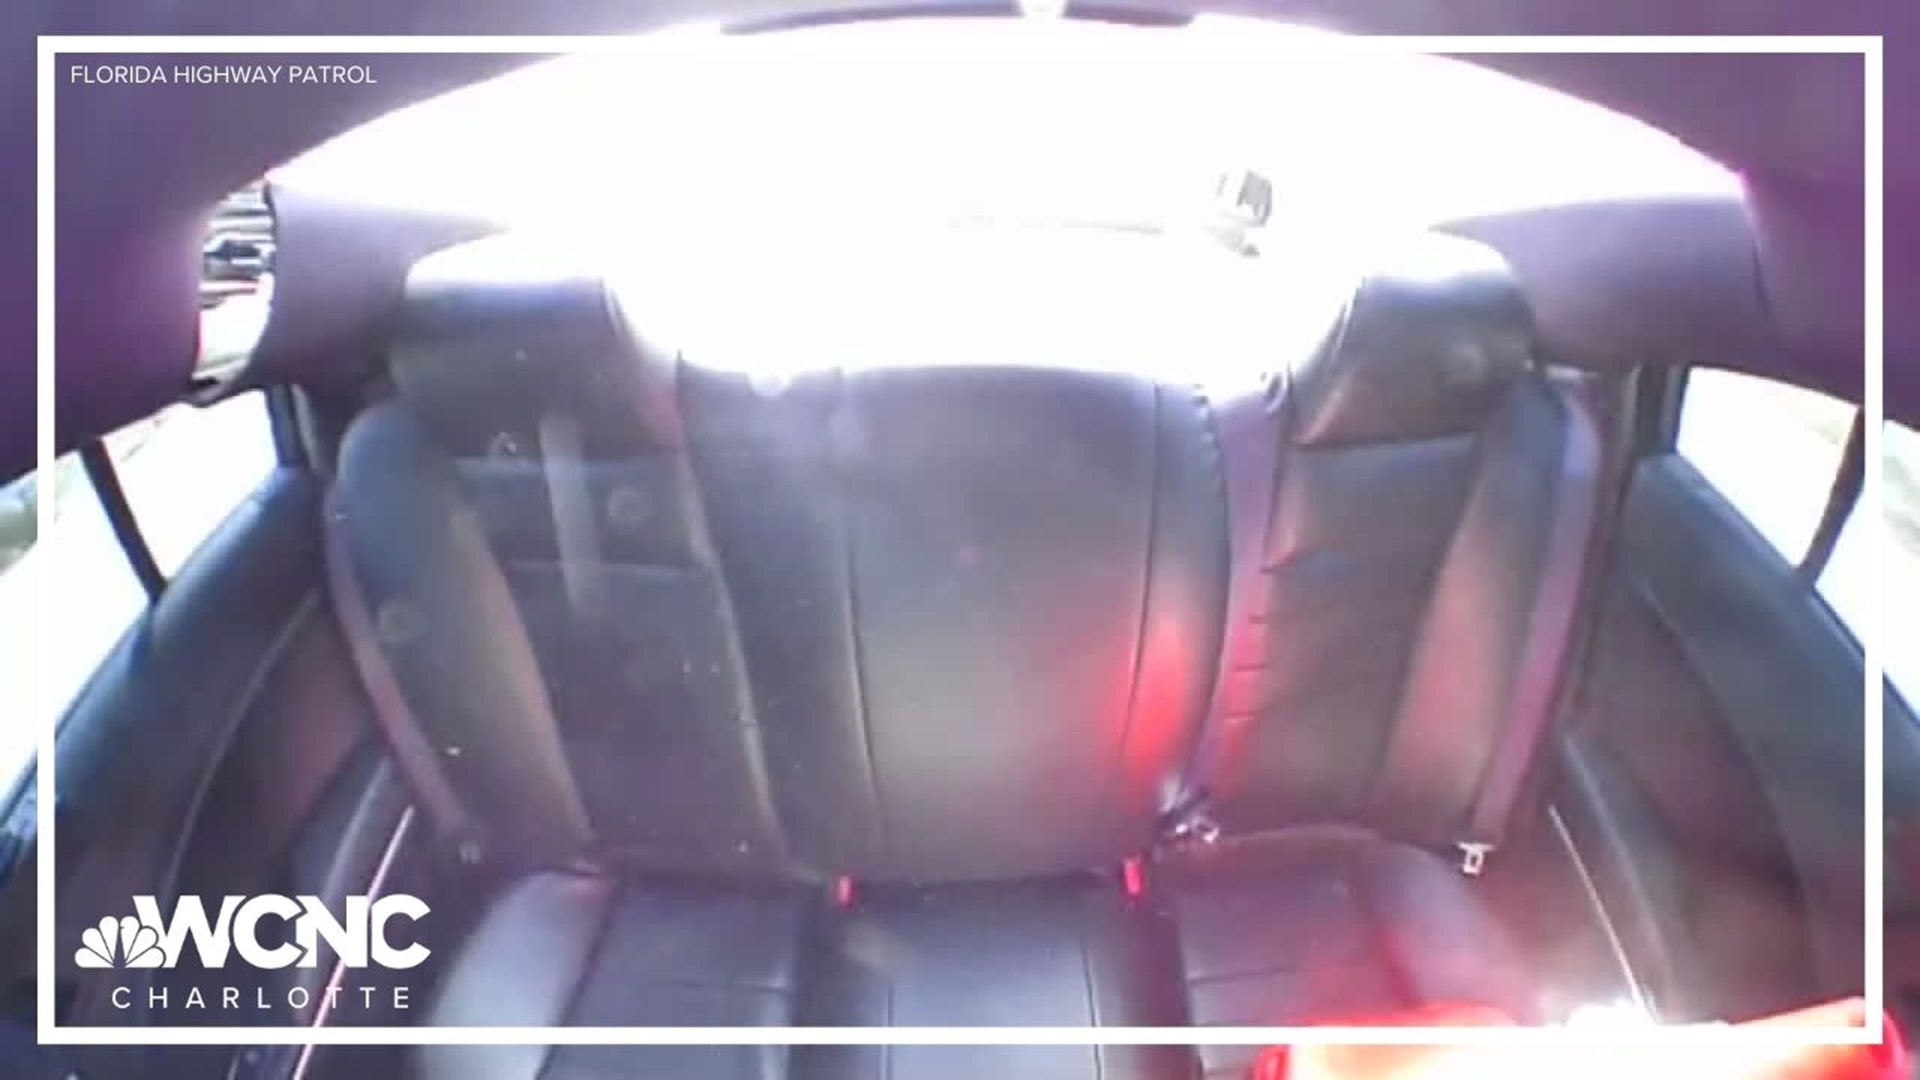 New dashcam from the Cape Coral, Florida, highway patrol trooper's car that was reportedly hit earlier this week by former NC Congressman Madison Cawthorn released.